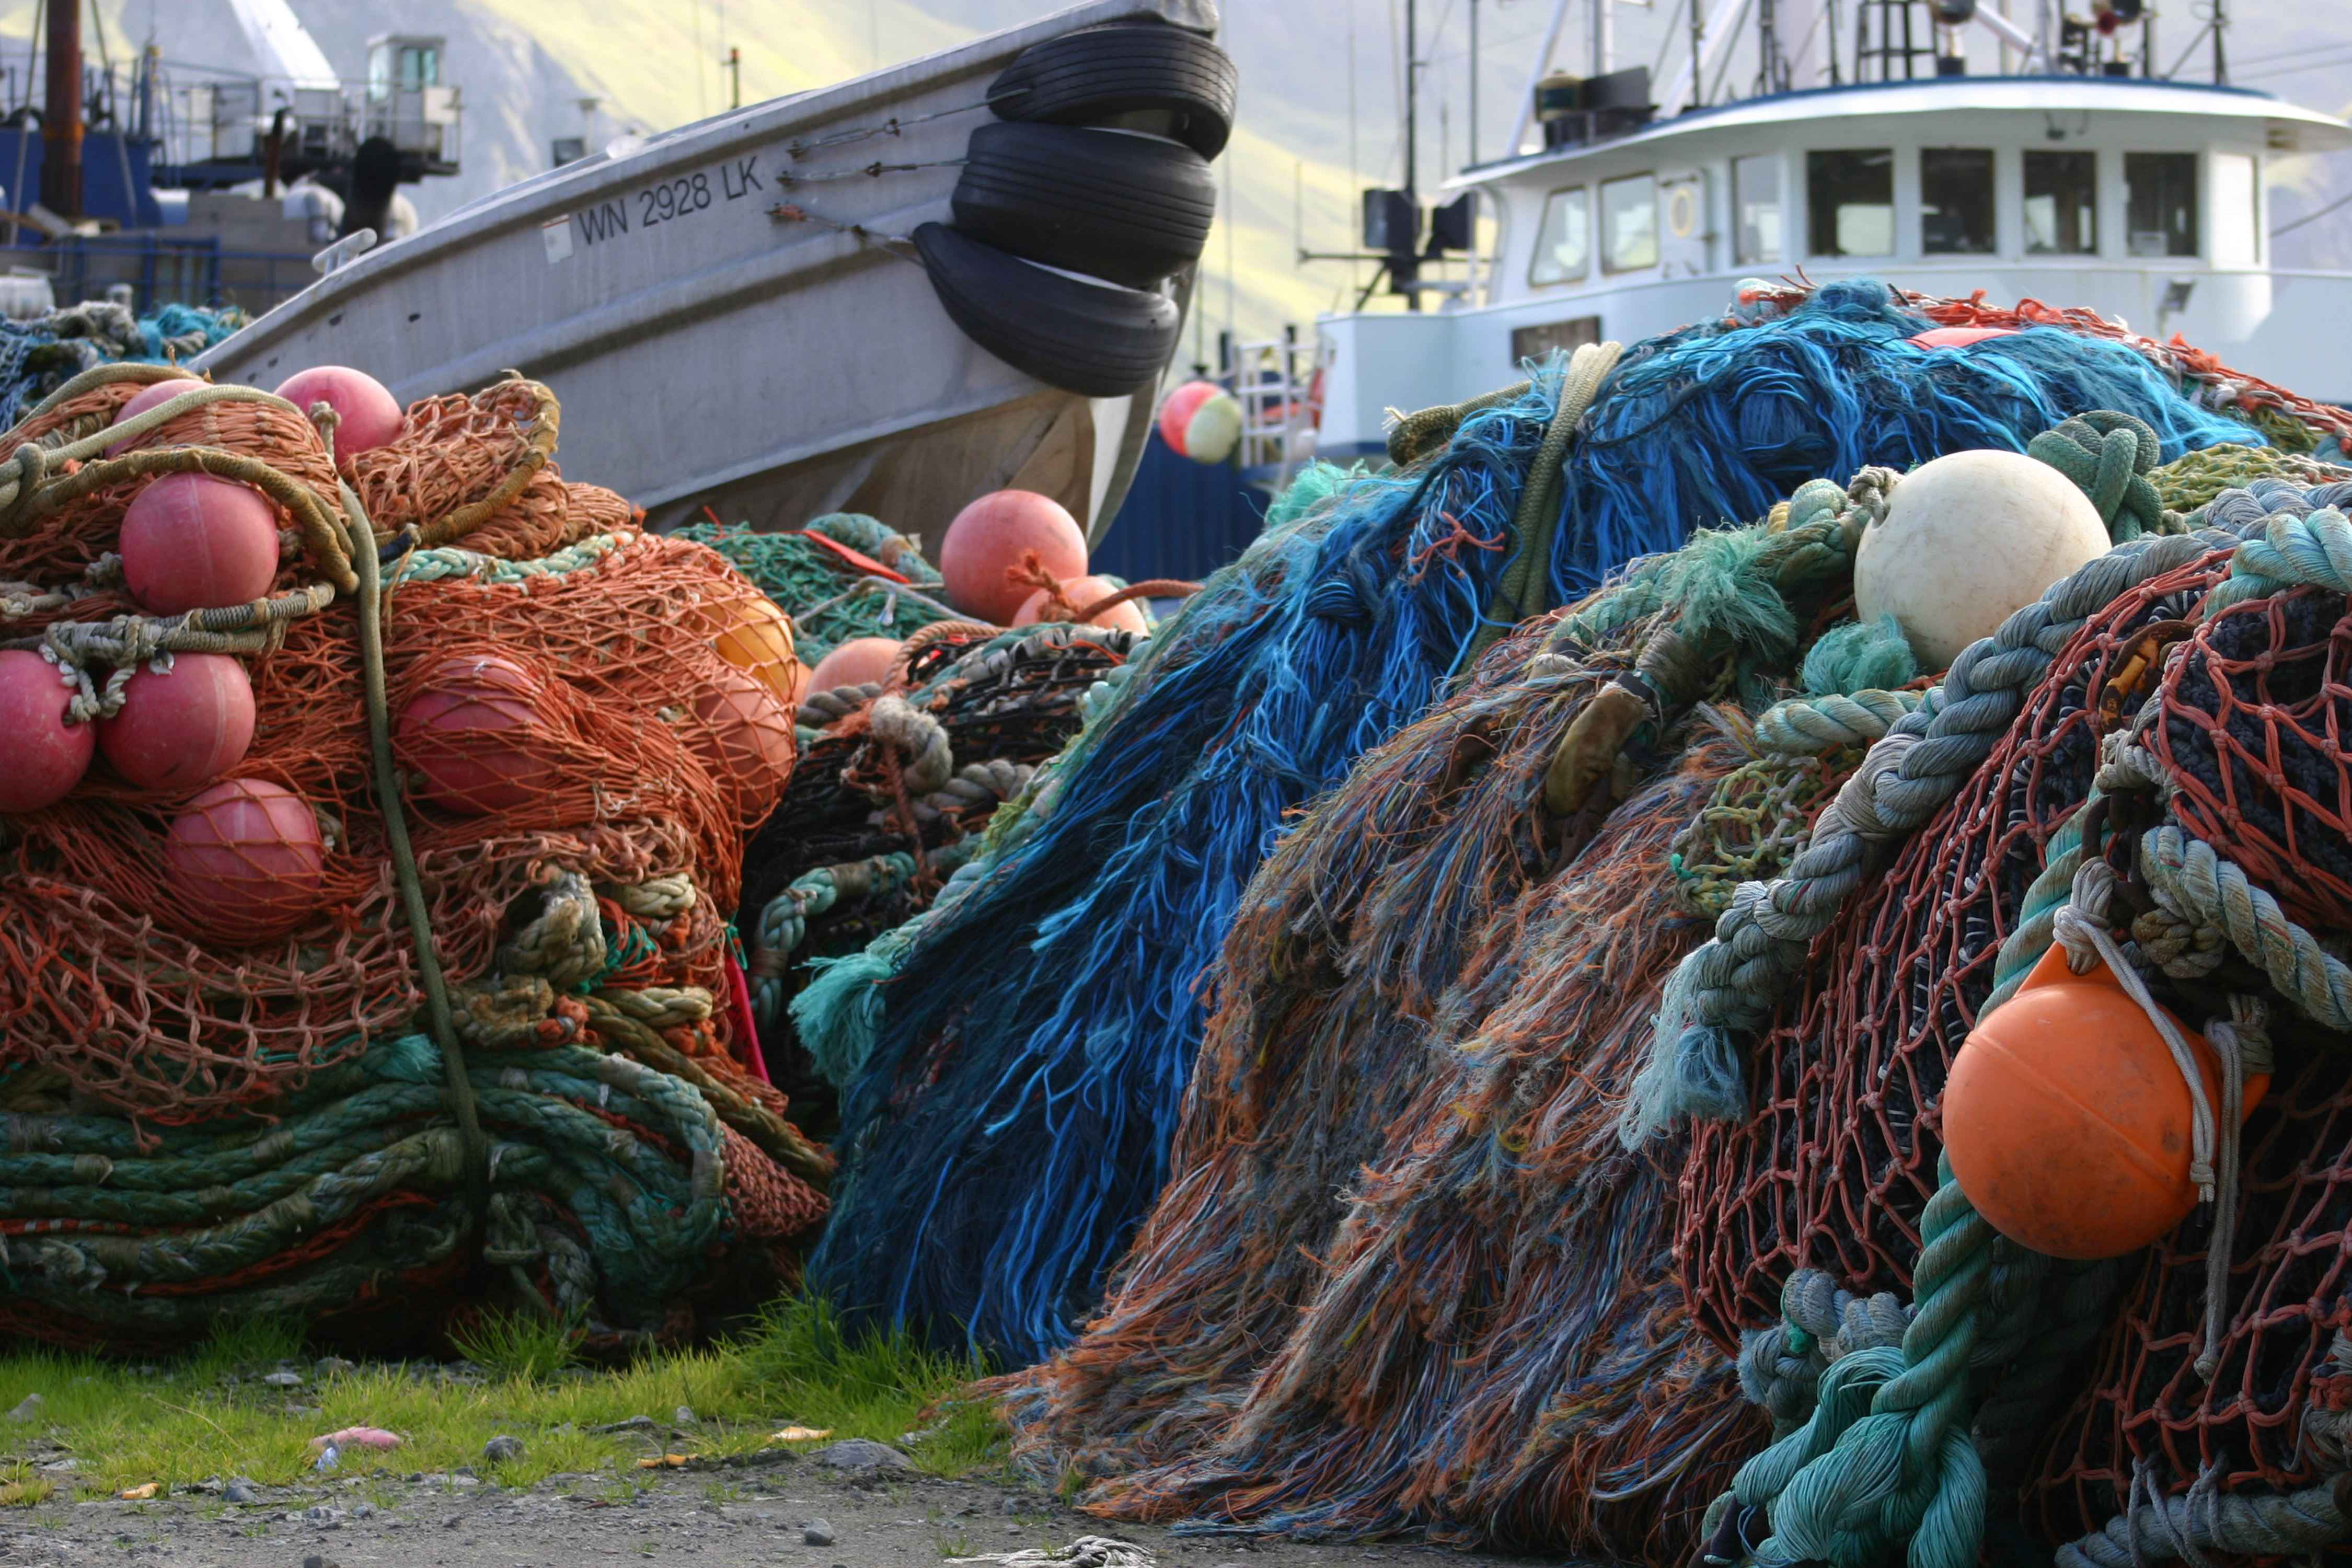 A colorful pile of fishing nets.